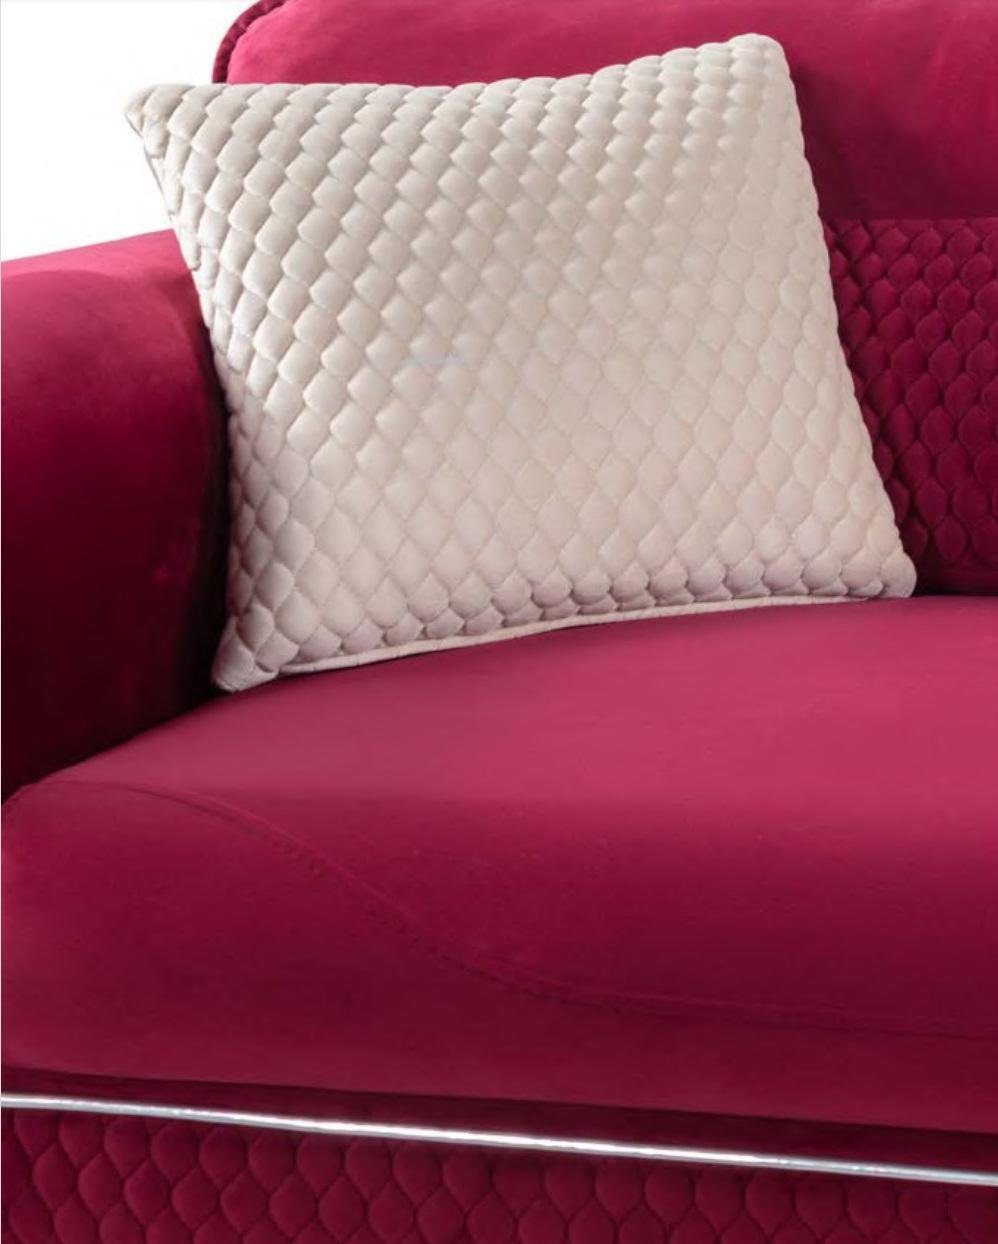 Polster Europe Luxus JVmoebel in Textil Sofa Made Couch Sitz 3 Möbel, Sofa Rotes Sofas